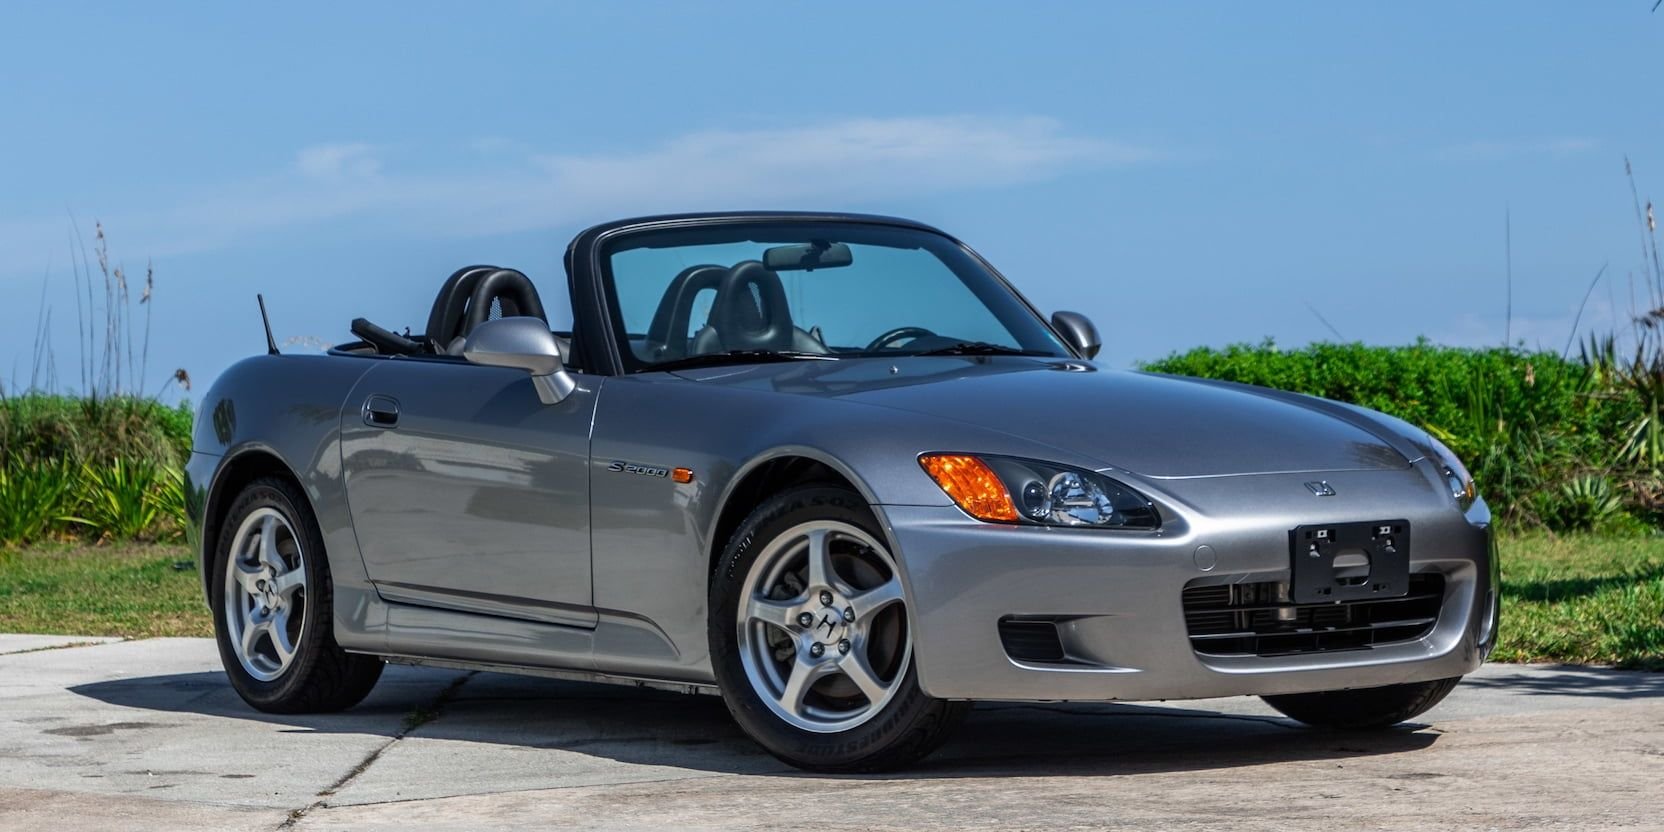 10 Best Manual Transmission Sports Cars You Can Buy For $30,000